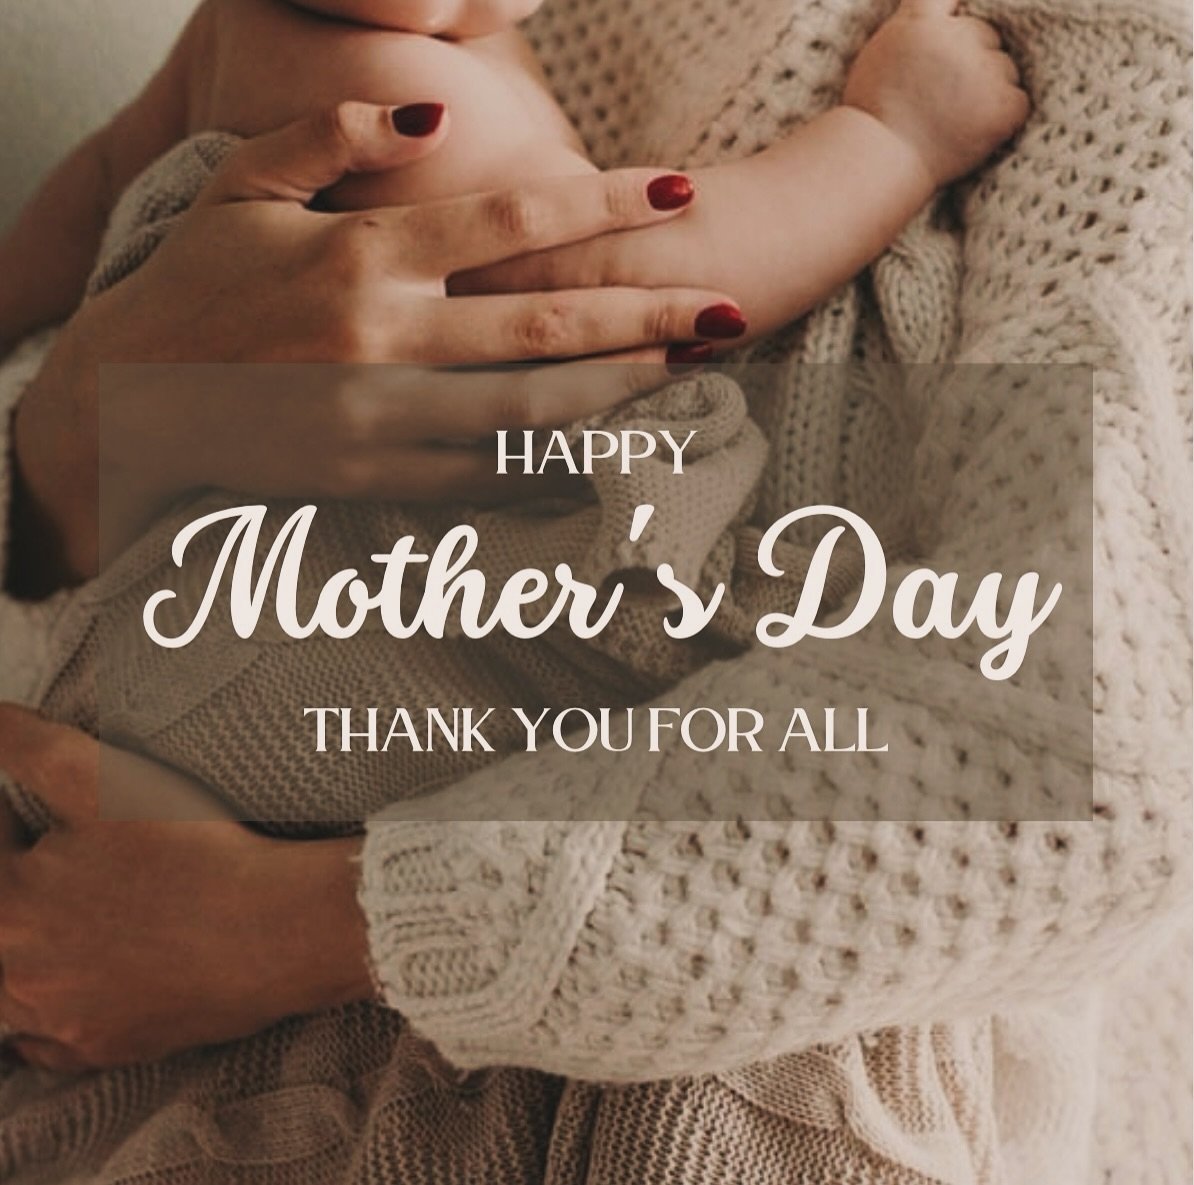 Happy mothers to ALL - those who have experienced loss, those with step-kids, those whose children have moved out and those that have moved away from their kids, those experiencing infertility, dog moms and cat moms, plant moms, those who have lost t